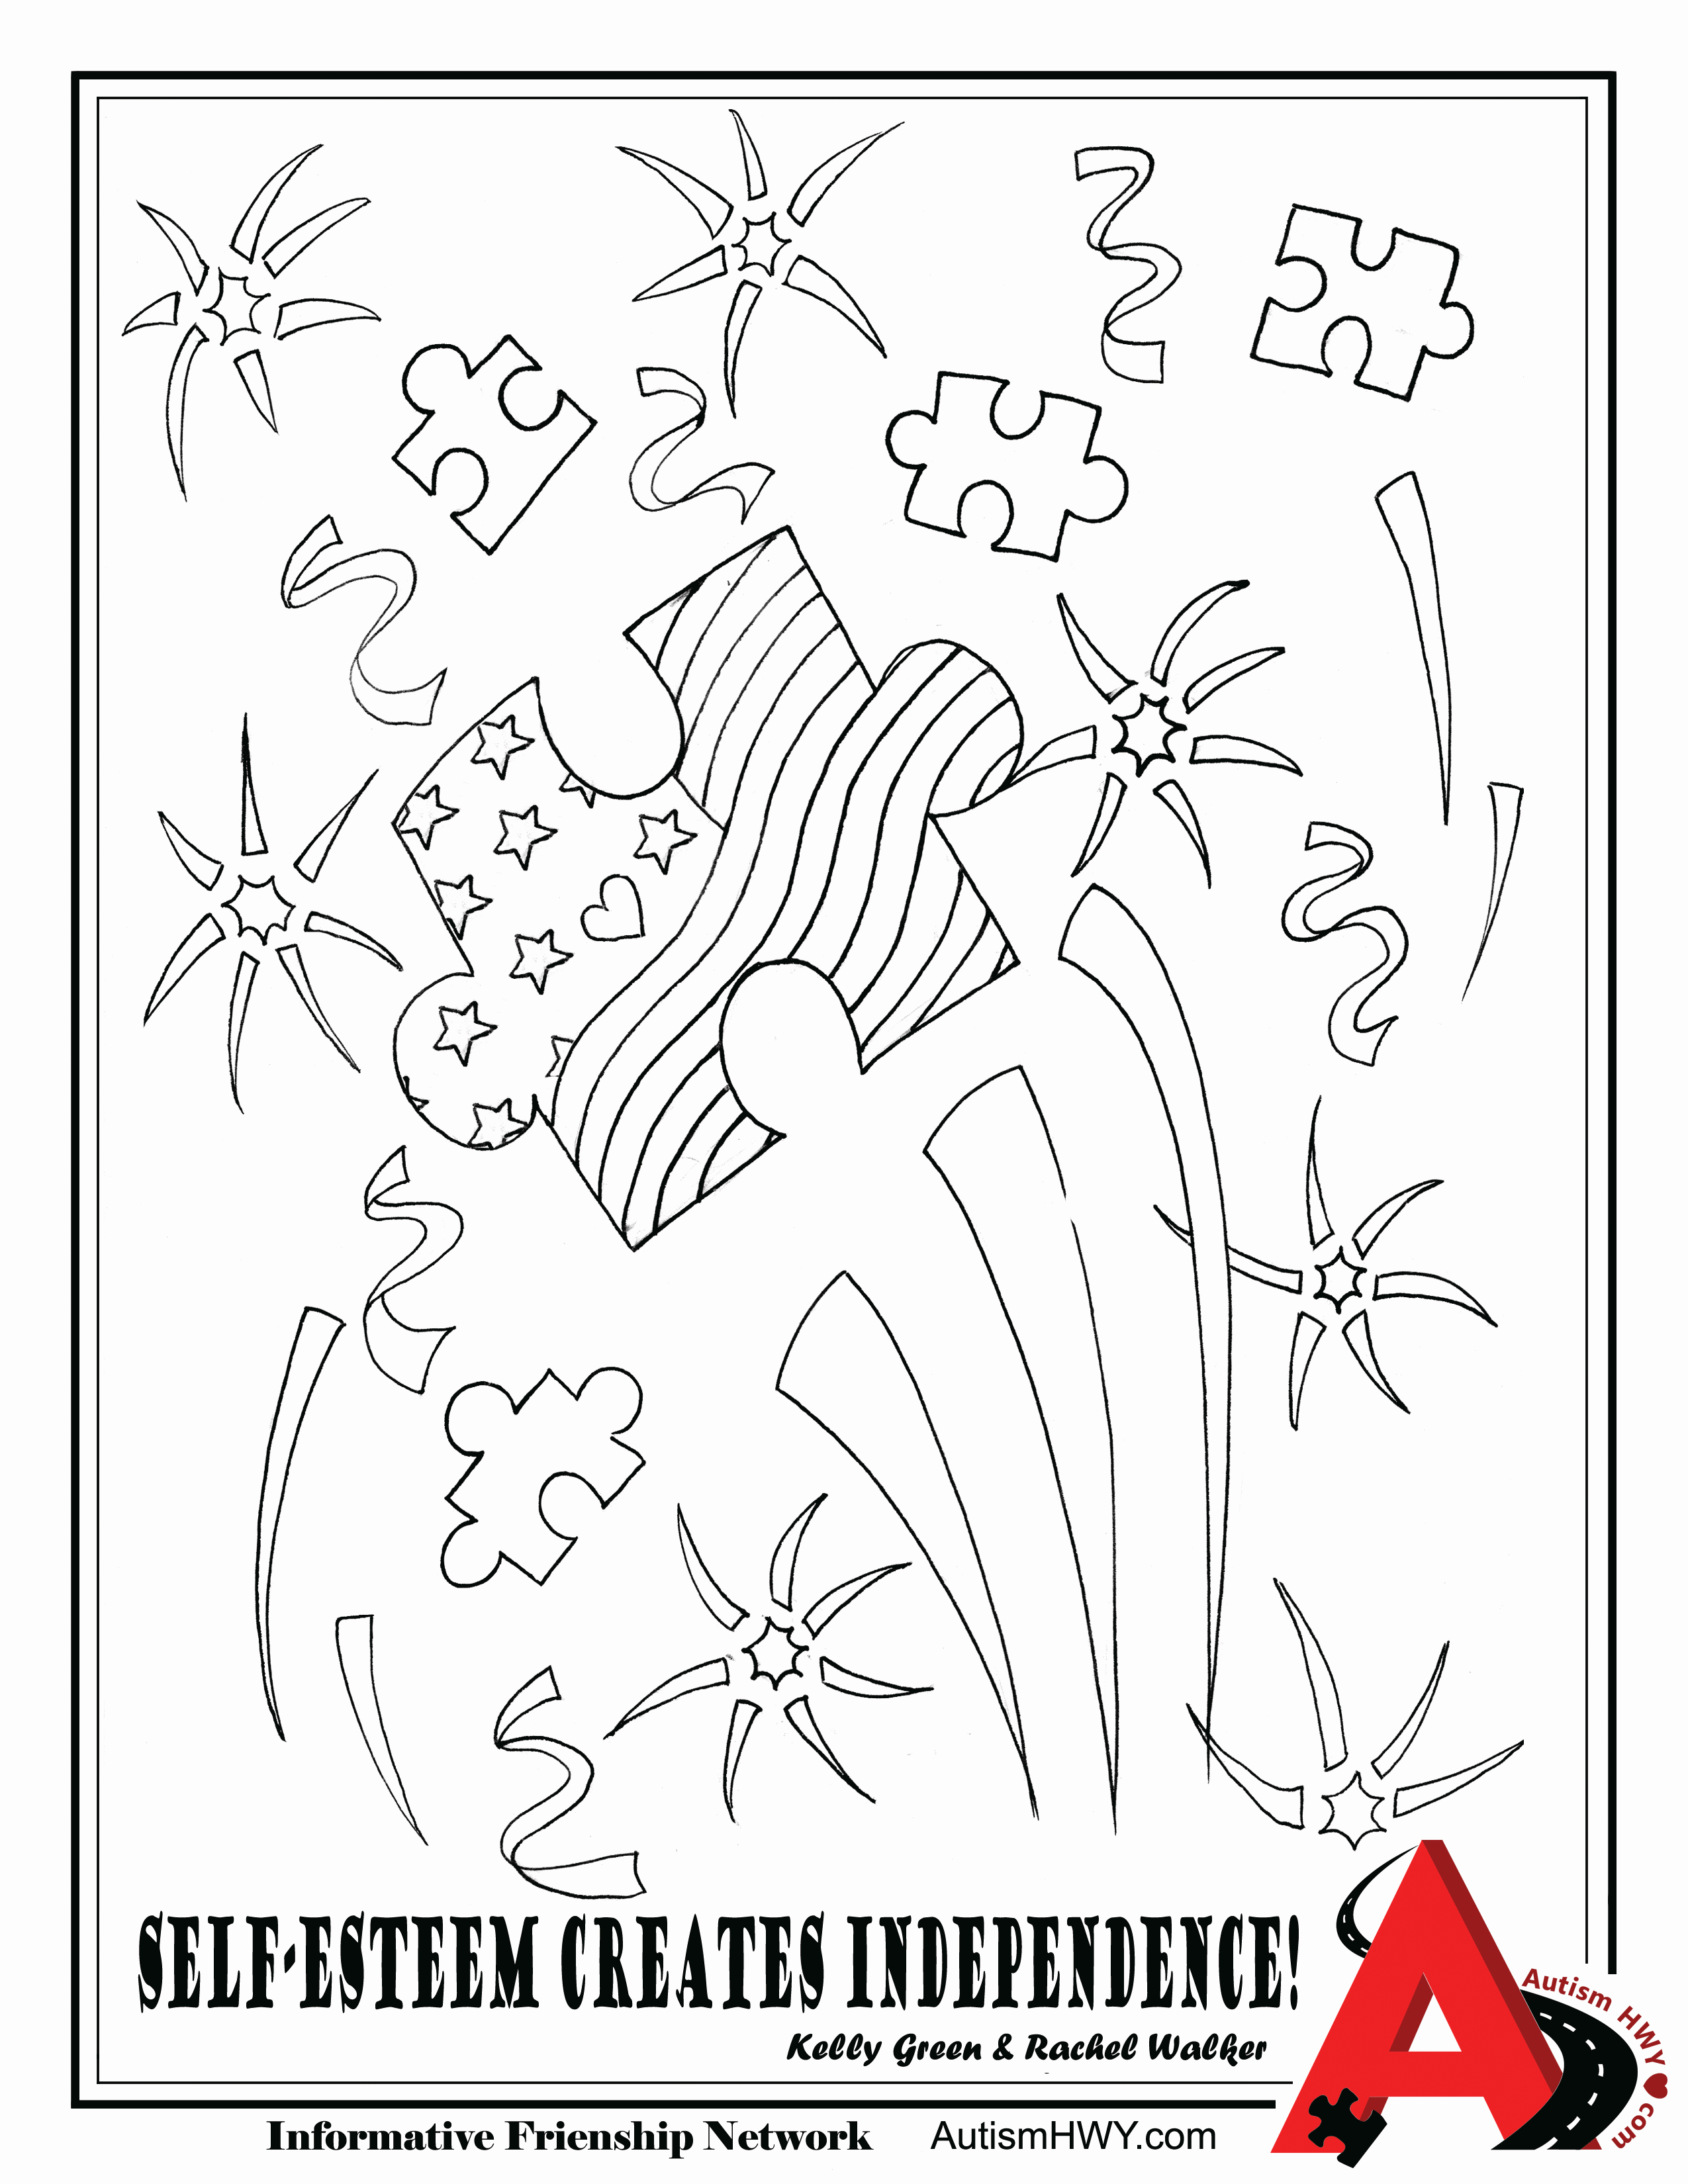 Autism Heart Coloring Pages - Coloring Pages For All Ages